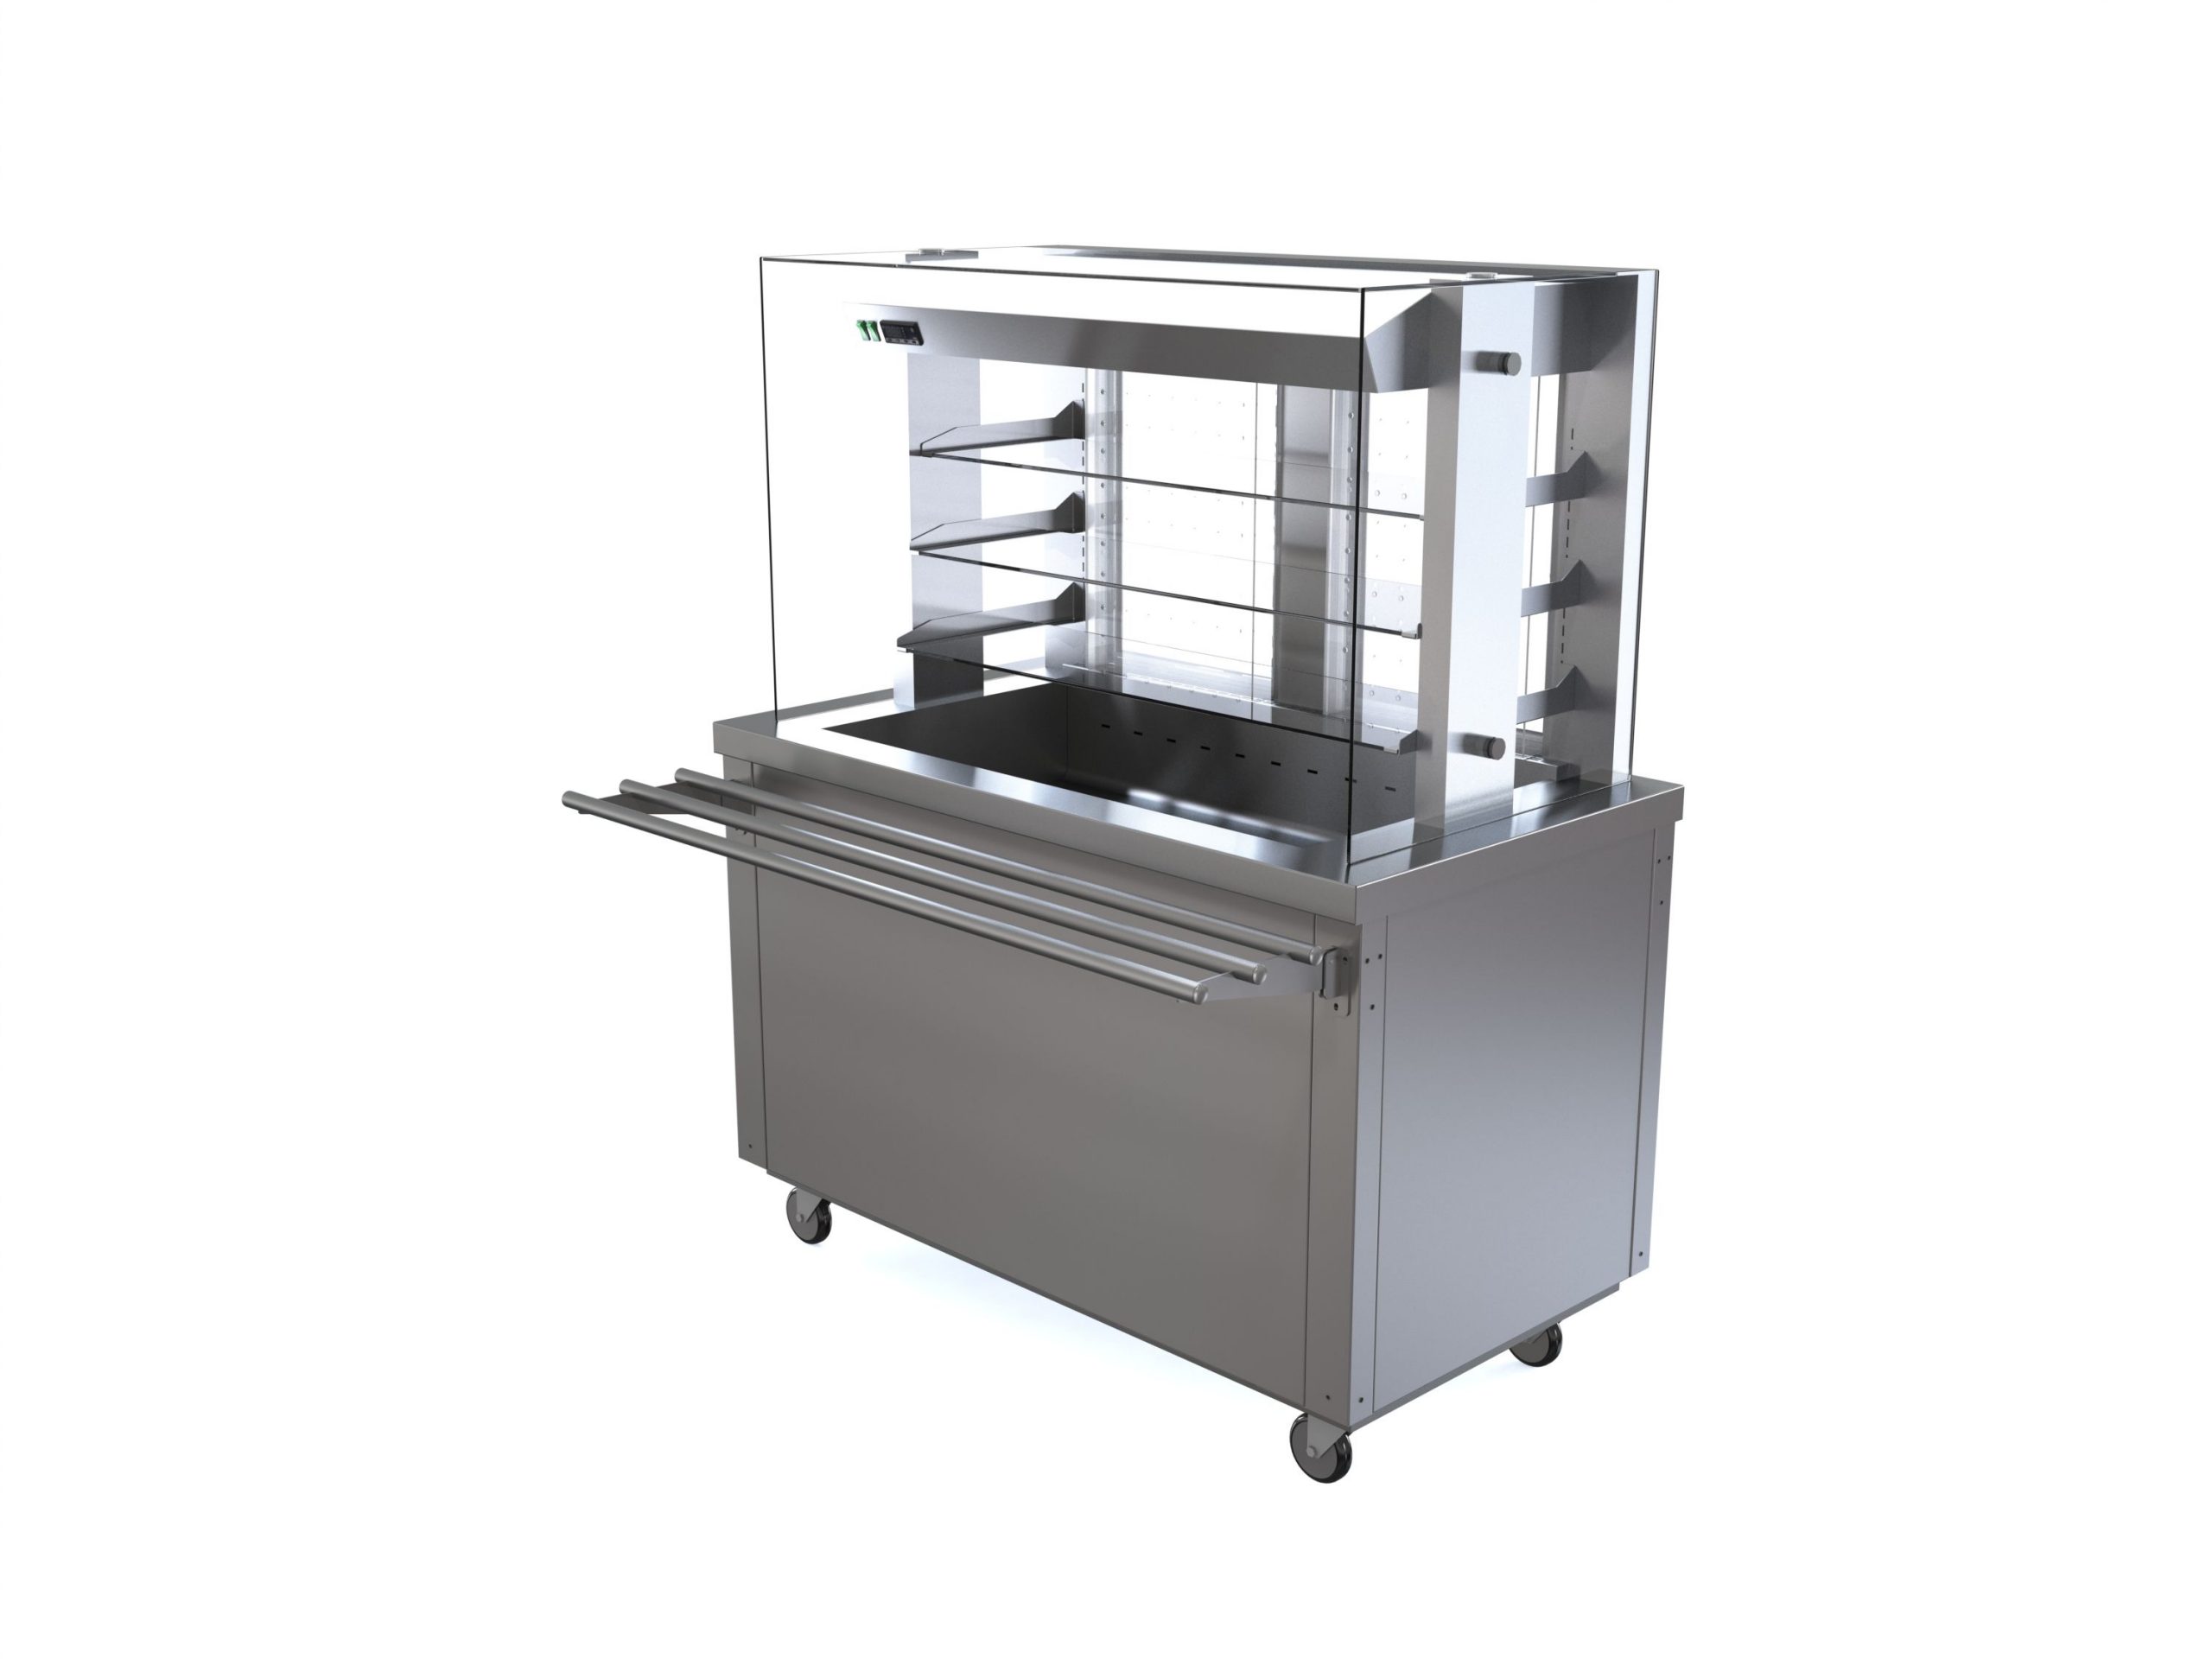 Parry FS-RMT5 - Flexi Serve Refrigerated Multi-Tier Display